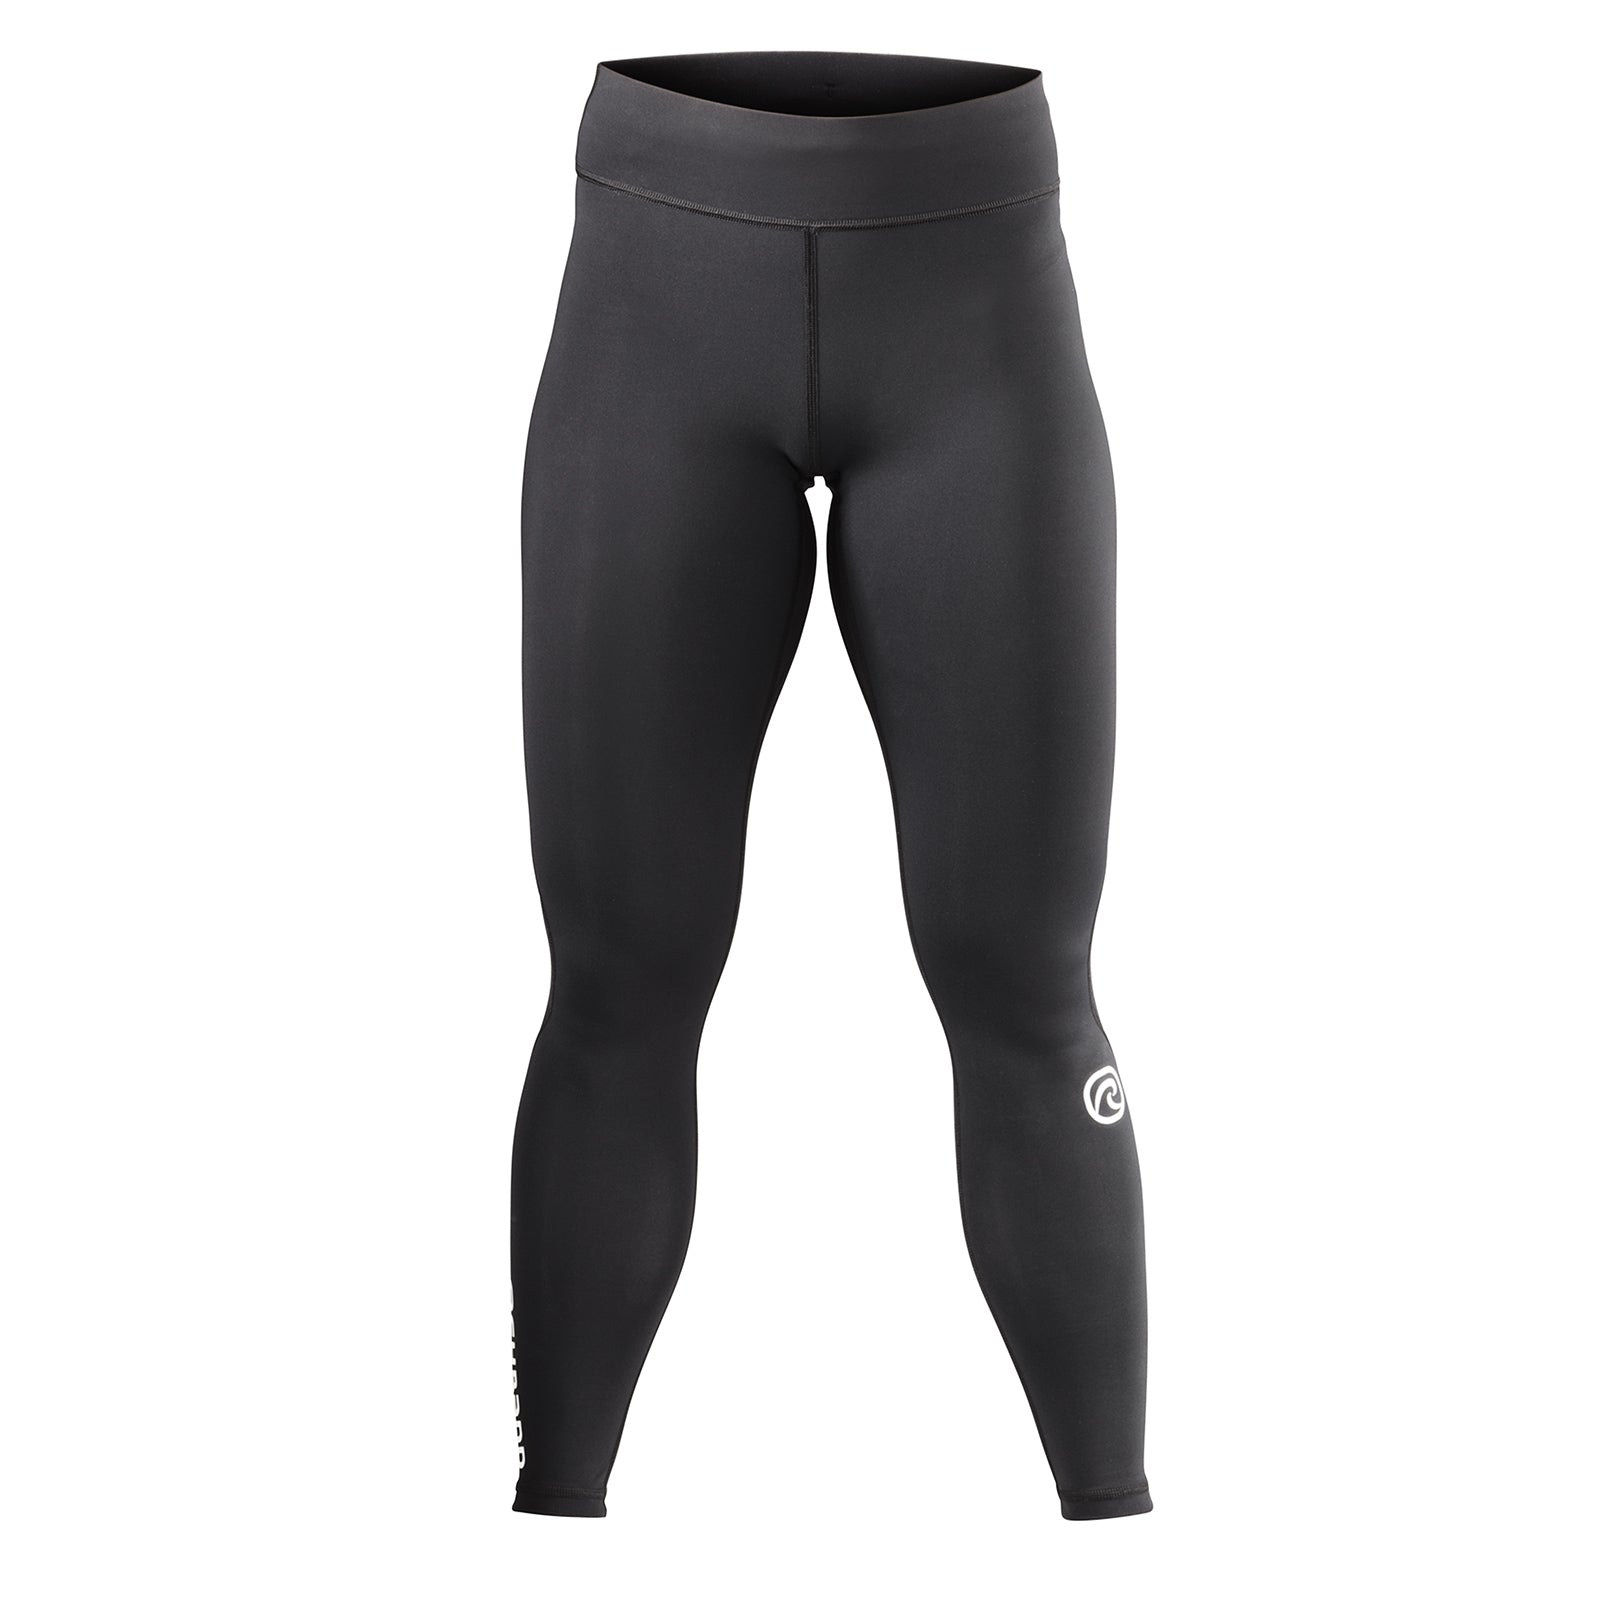 A black compression tight for men with a white Rehband lettering and logo on the sides